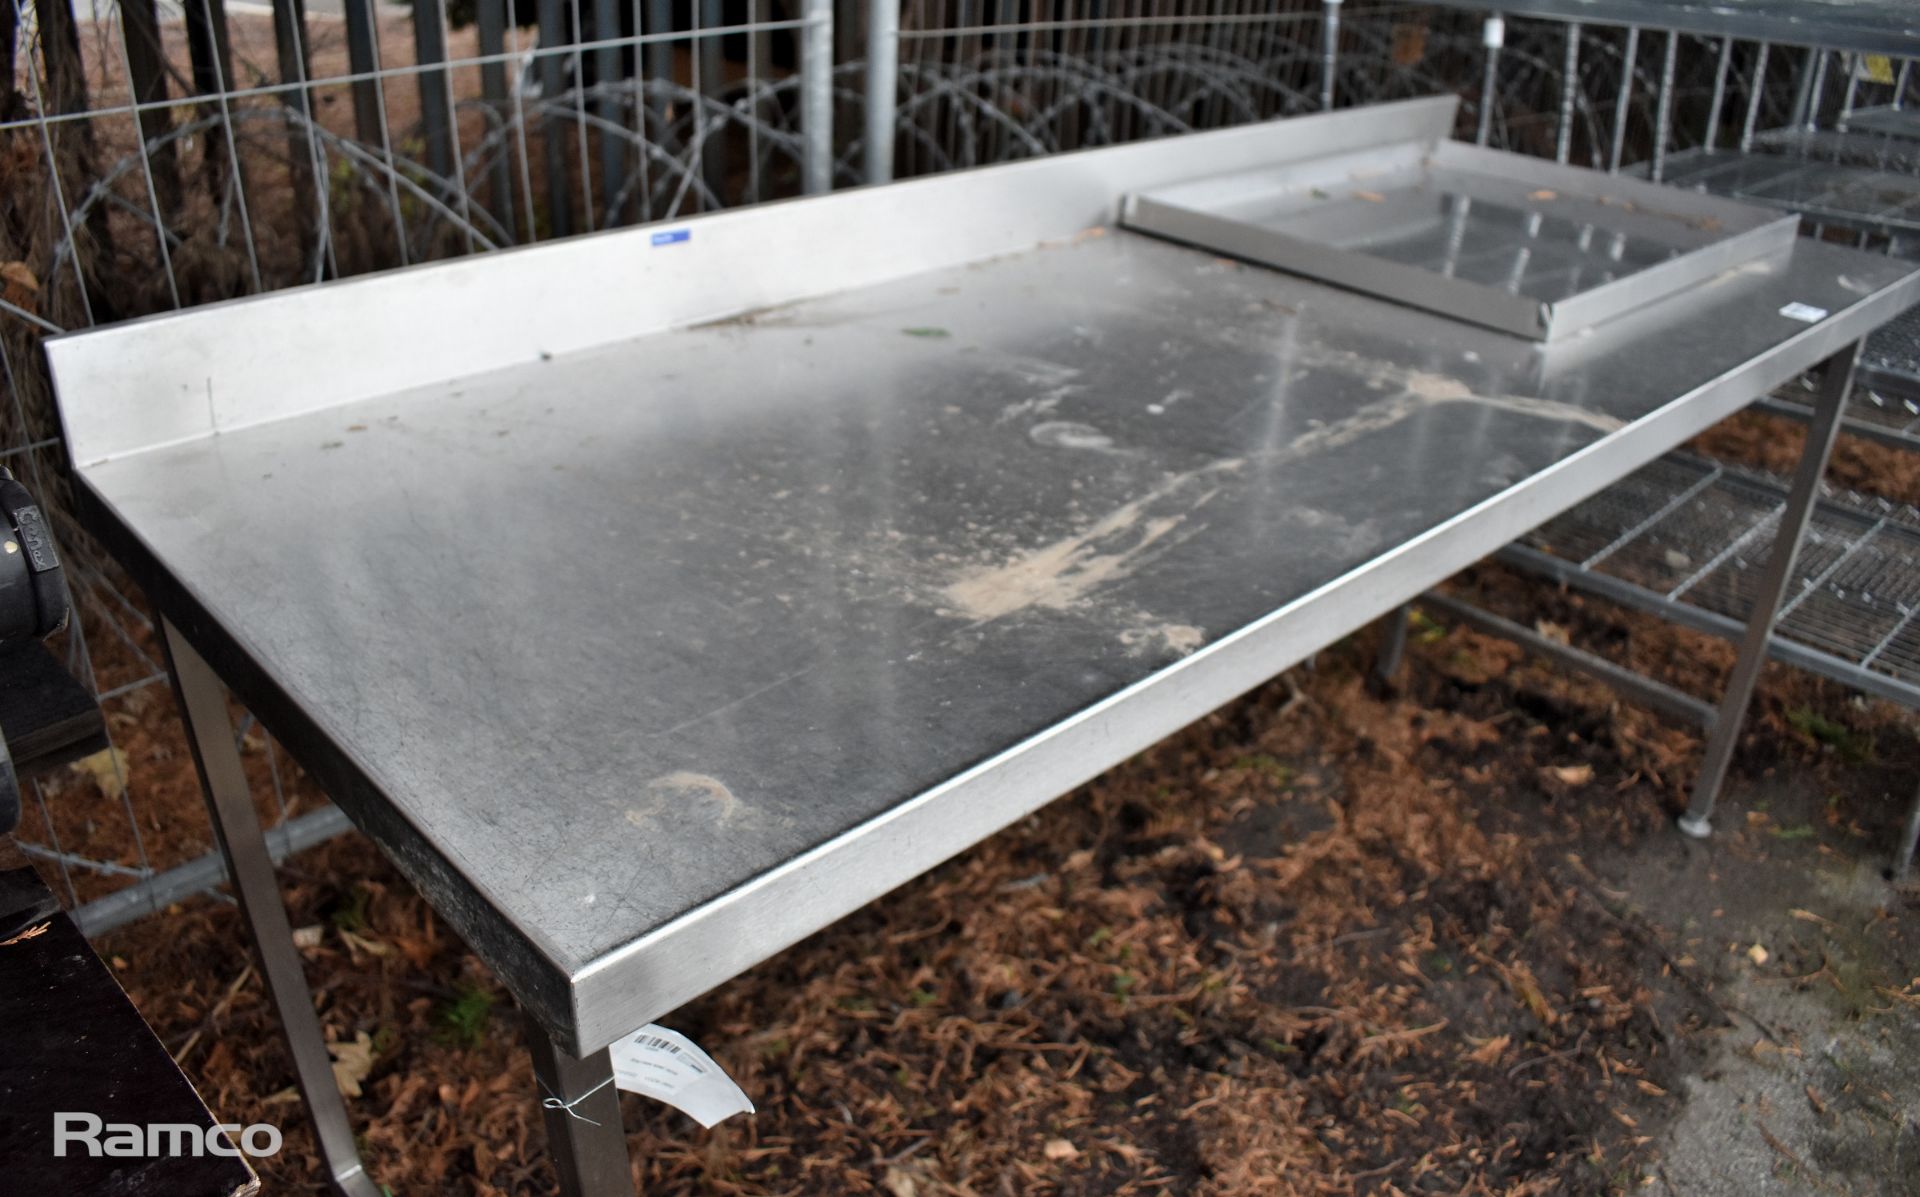 Stainless steel table - Image 2 of 3